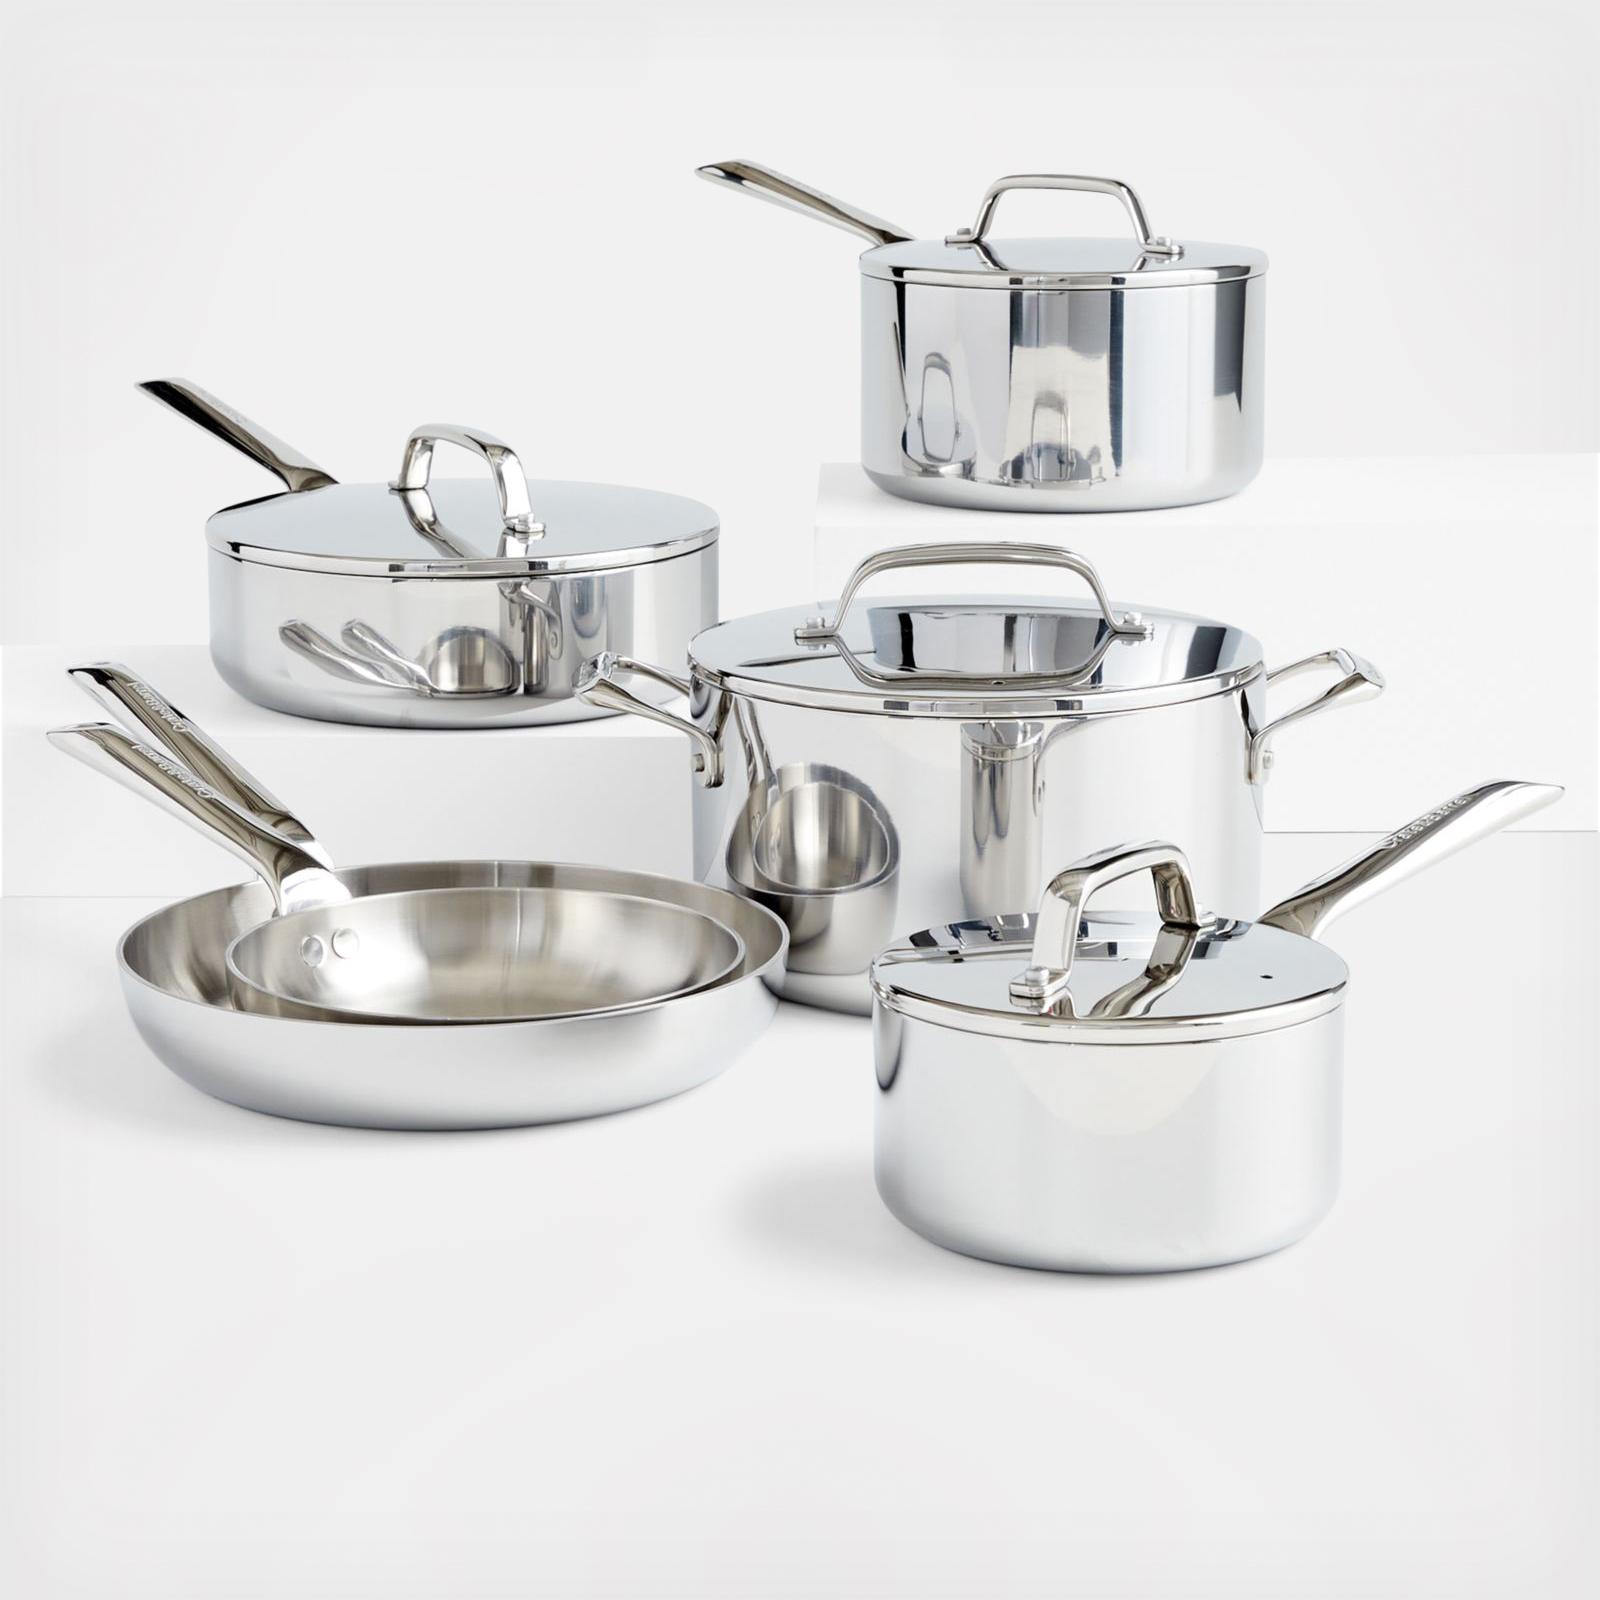 Crate & Barrel EvenCook Core 3.5 Qt. Stainless Steel Saucepan with Lid +  Reviews